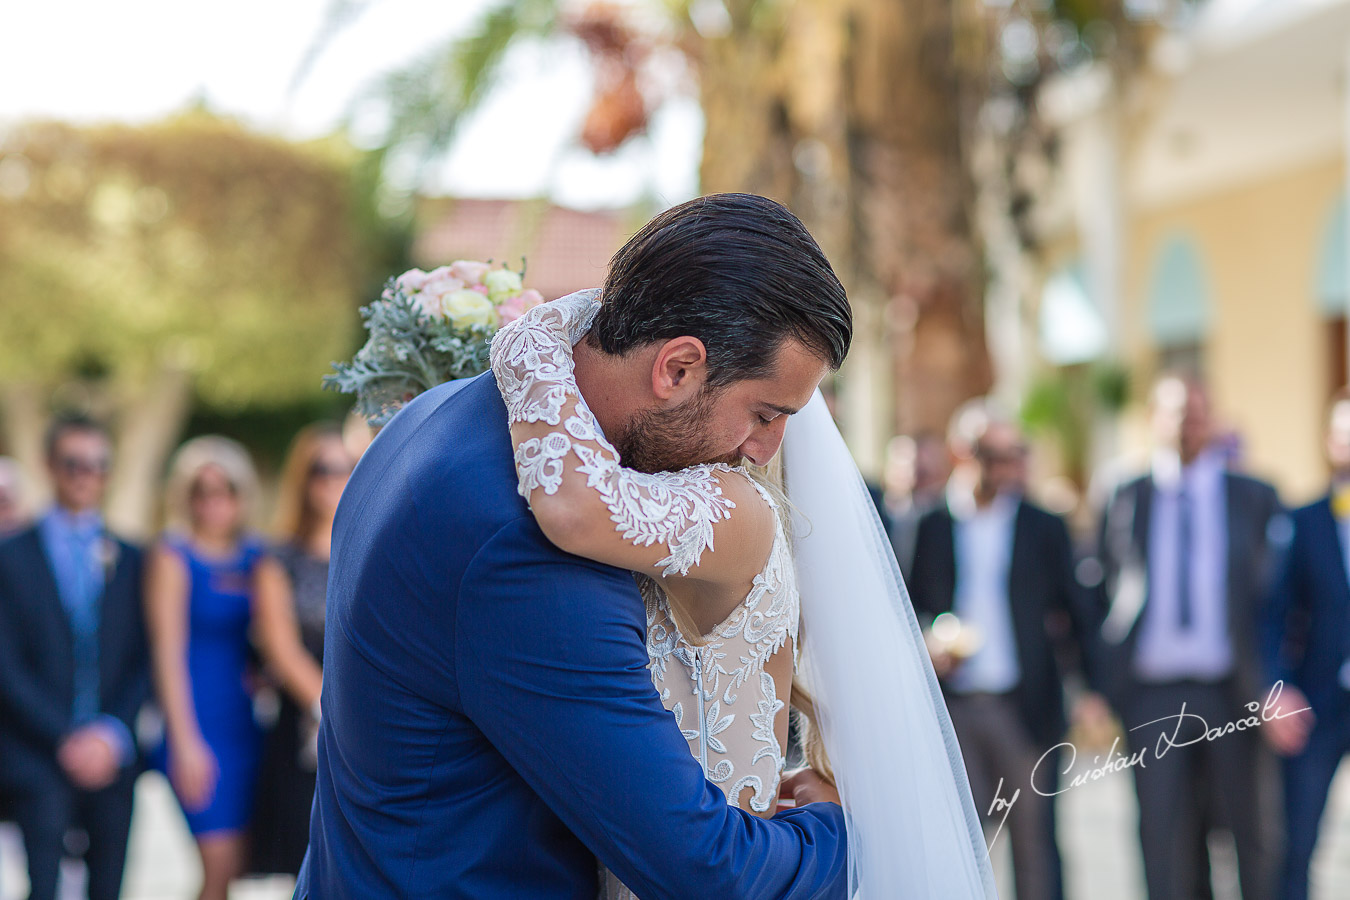 Moments before the church ceremony captured at an elegant and romantic wedding at Elias Beach Hotel by Cristian Dascalu.